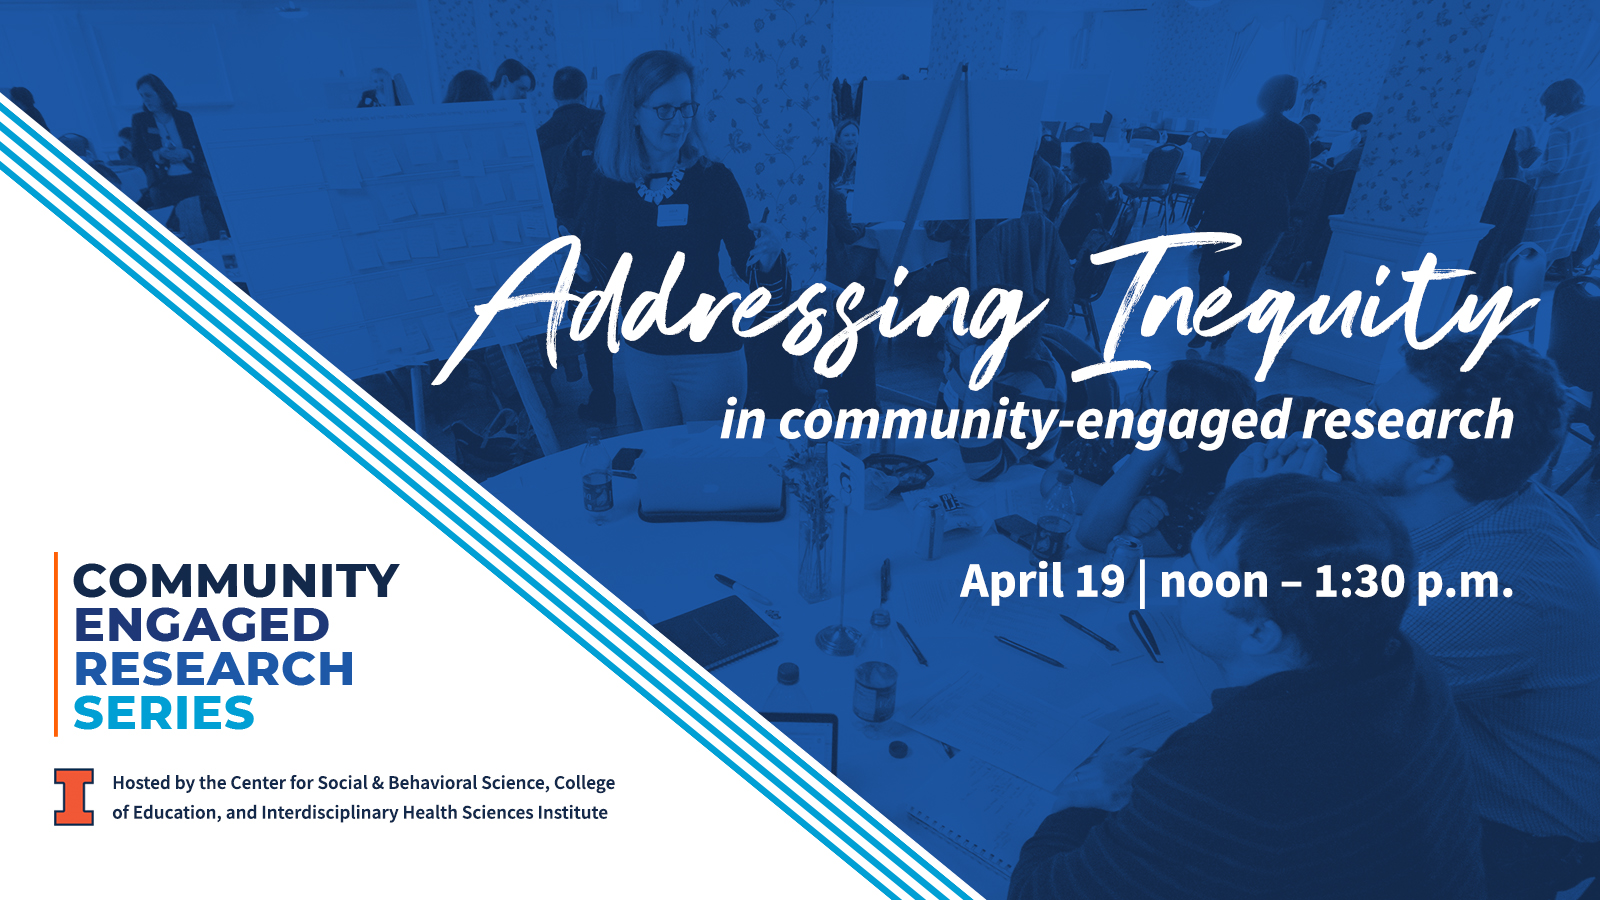 Assessing Inequity in community-engaged research April 19 | noon - 1:30 p.m. Community Engaged Research Series